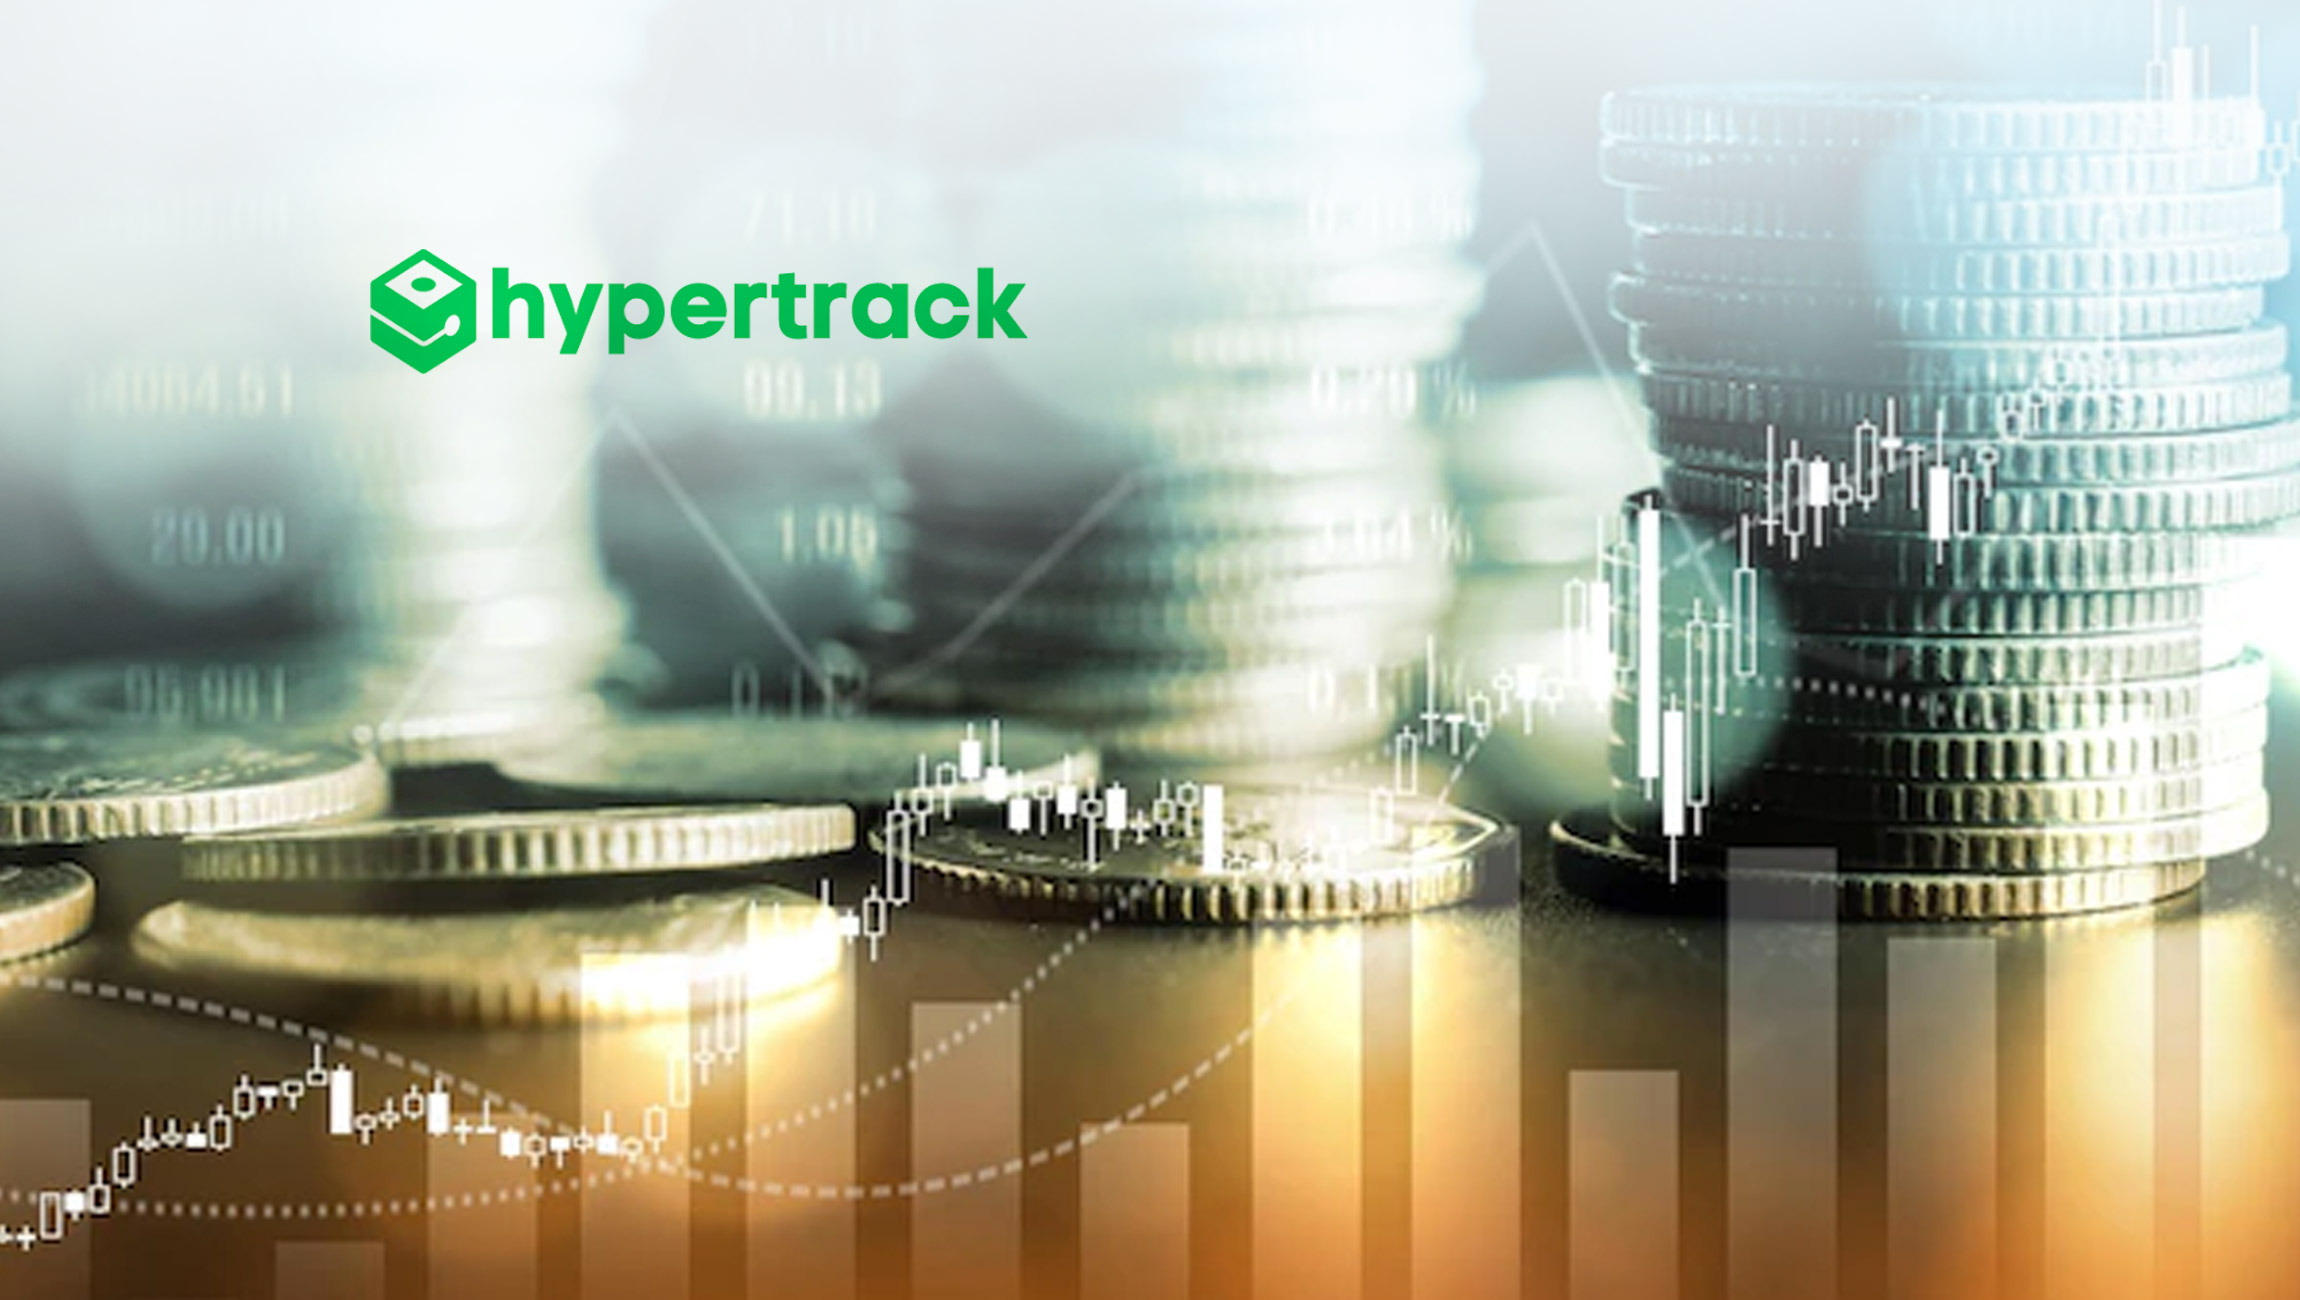 HyperTrack Strengthens Last Mile Logistics Solution with New Capabilities to Improve Order Fulfillment Accuracy